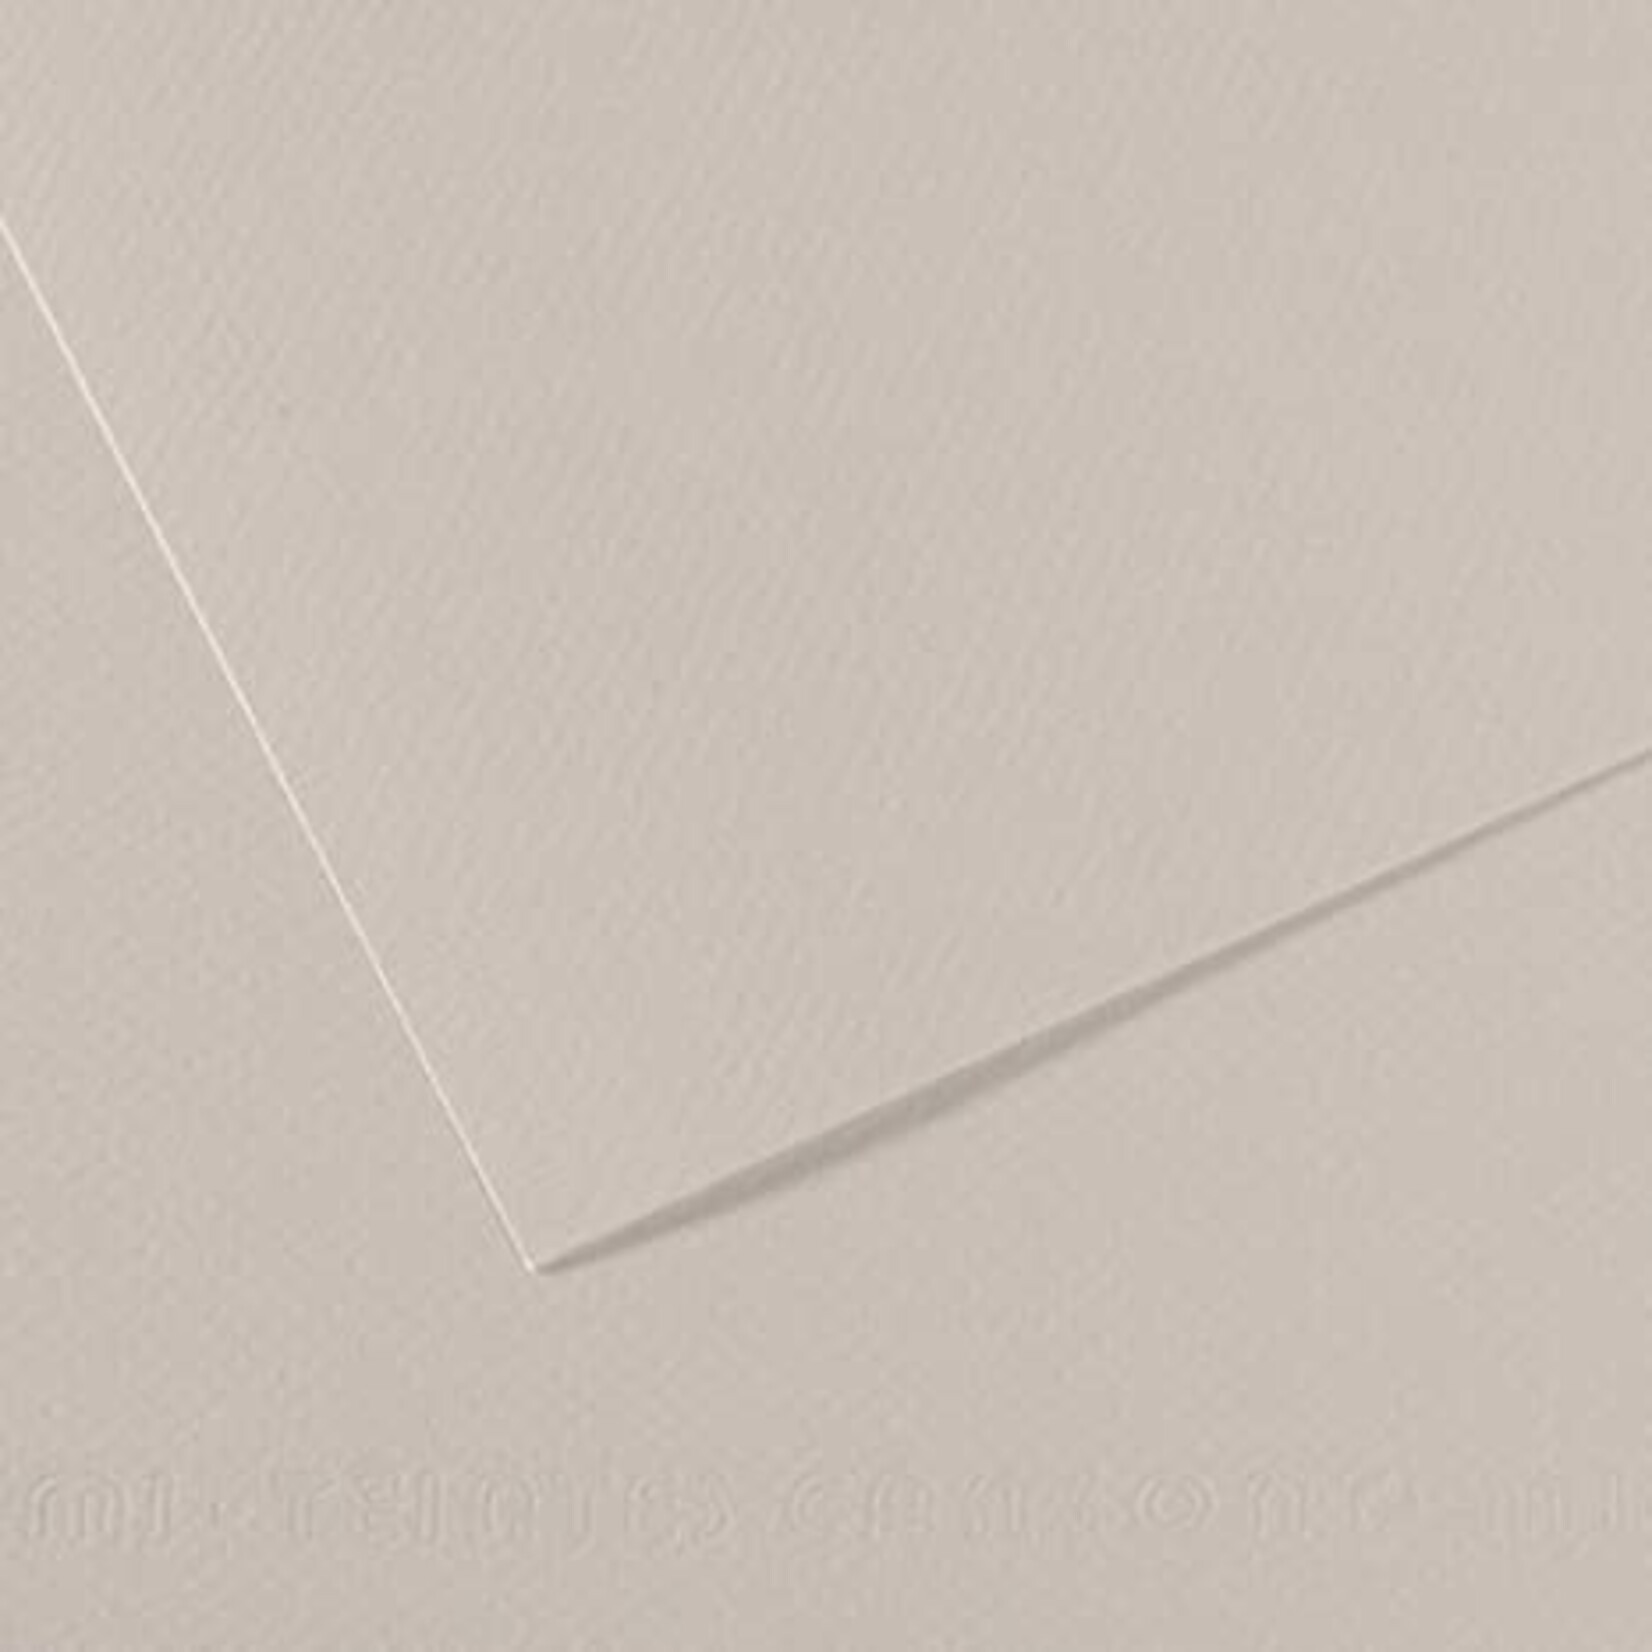 Canson Mi-Teintes Paper Sheets, 8-1/2'' x 11'', Pearl Gray